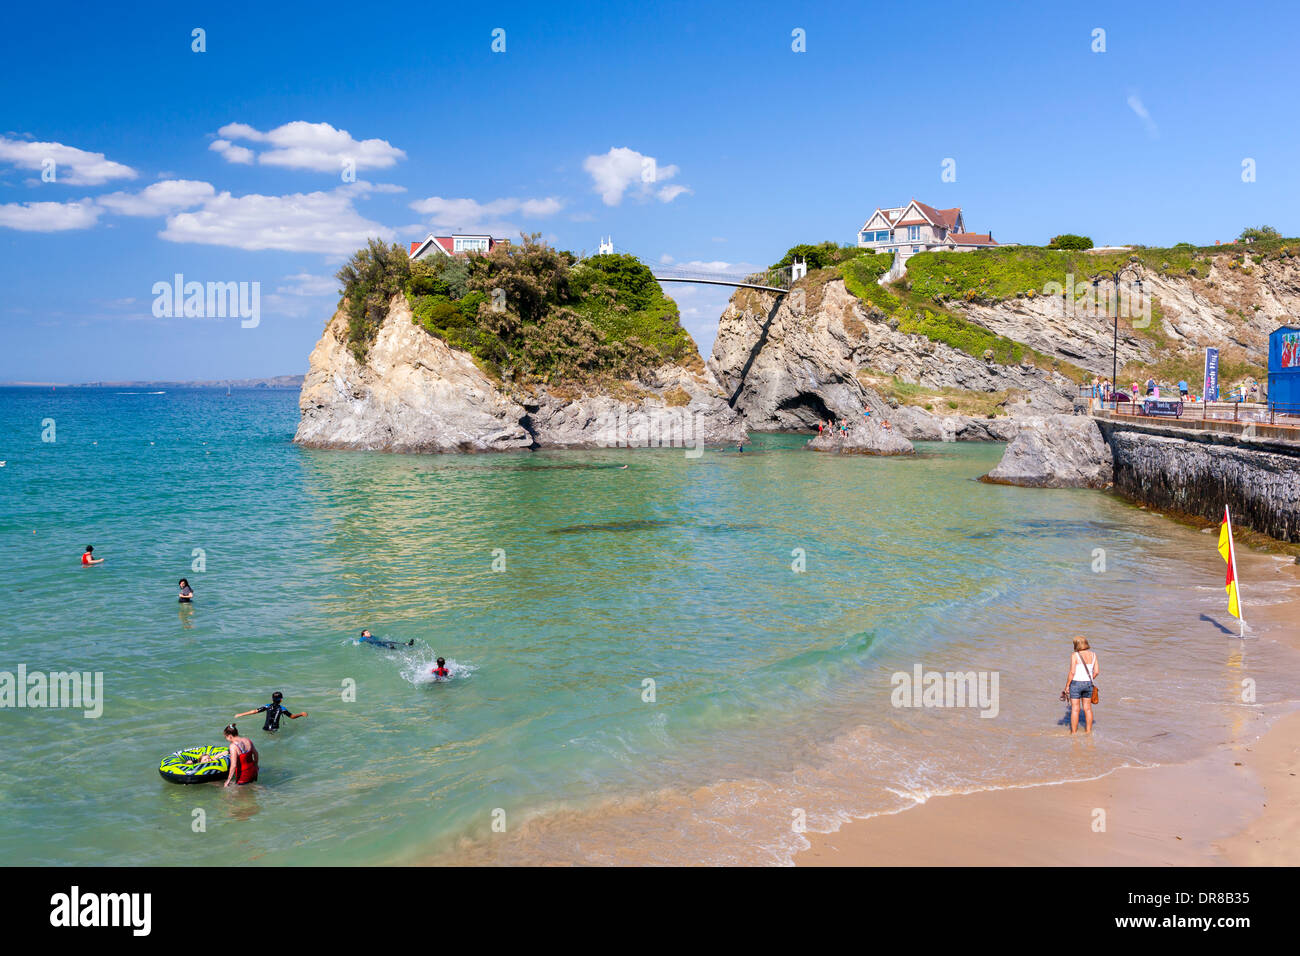 Plage de Towan, Newquay, Cornwall, Angleterre, Royaume-Uni, Europe. Banque D'Images